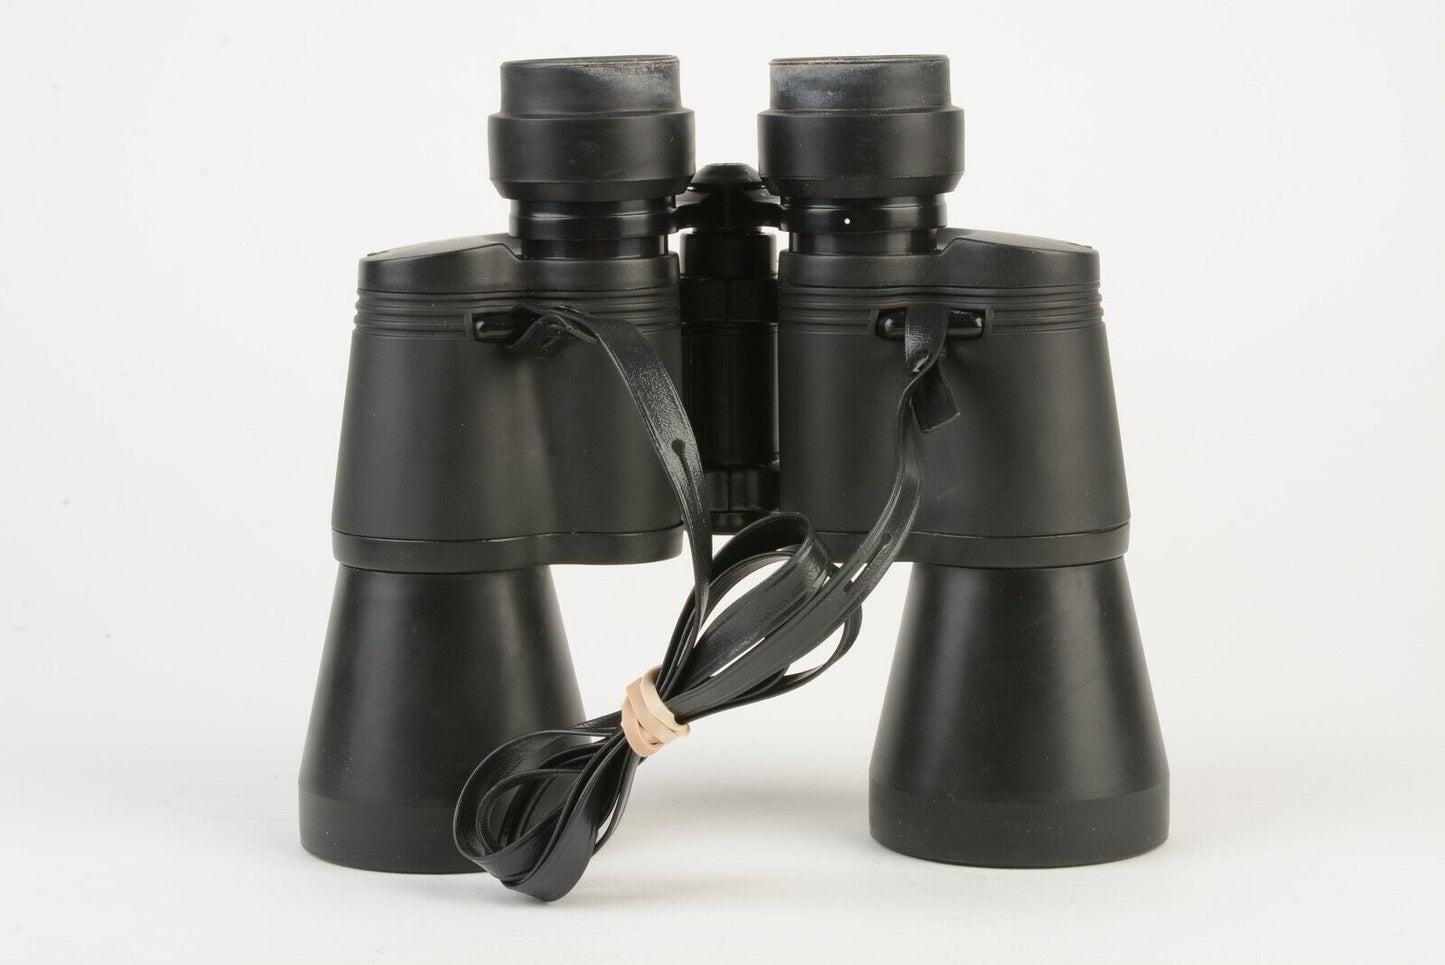 EXC++ TASCO 10x50 BINOCULARS #2023 BRZ WIDE ANGLE, VERY CLEAN, TESTED, CASE+CAPS